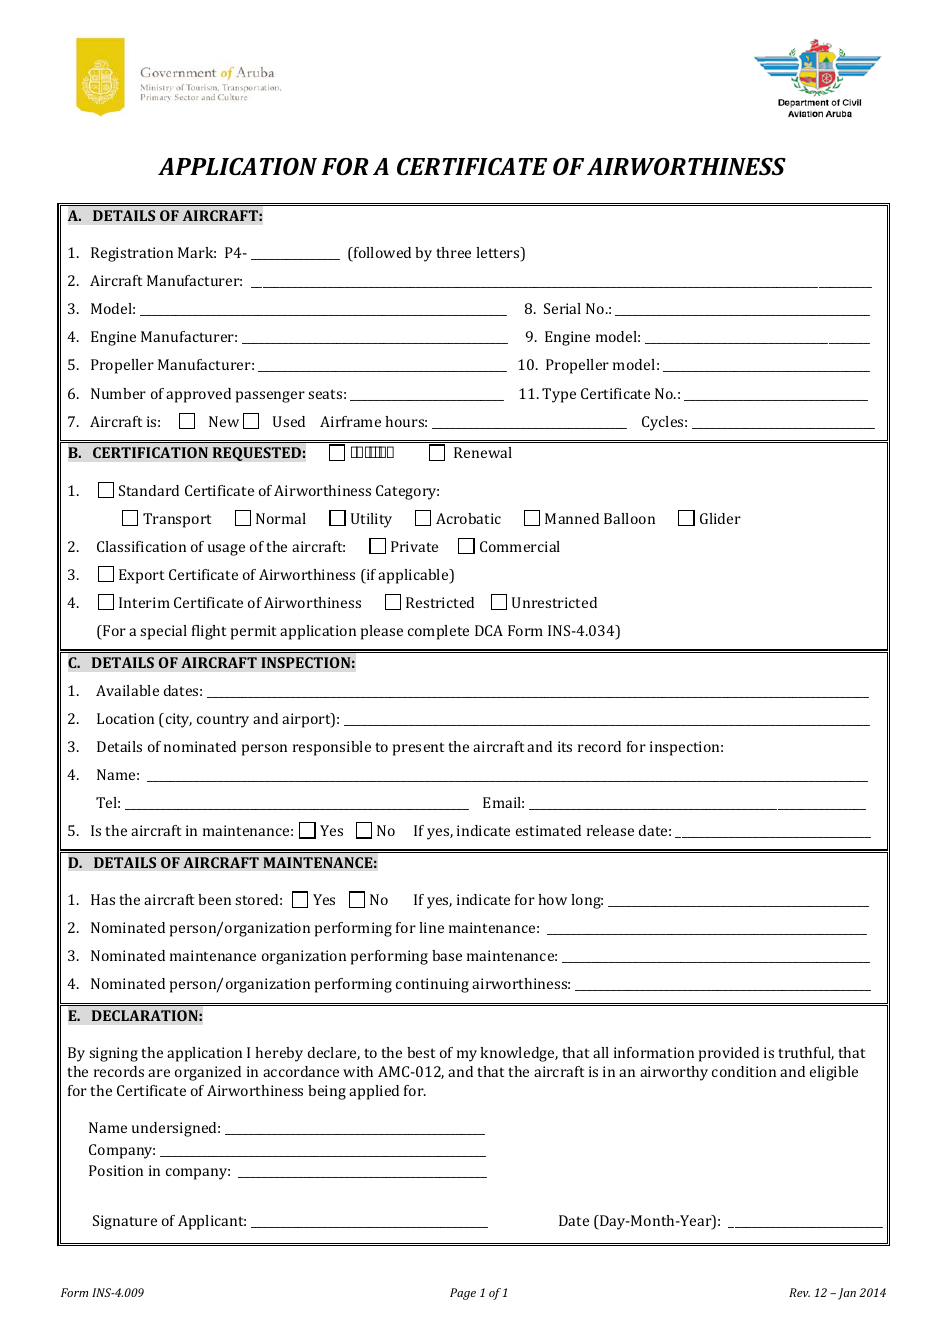 Form INS-4.009 Application for a Certificate of Airworthiness - Aruba, Page 1